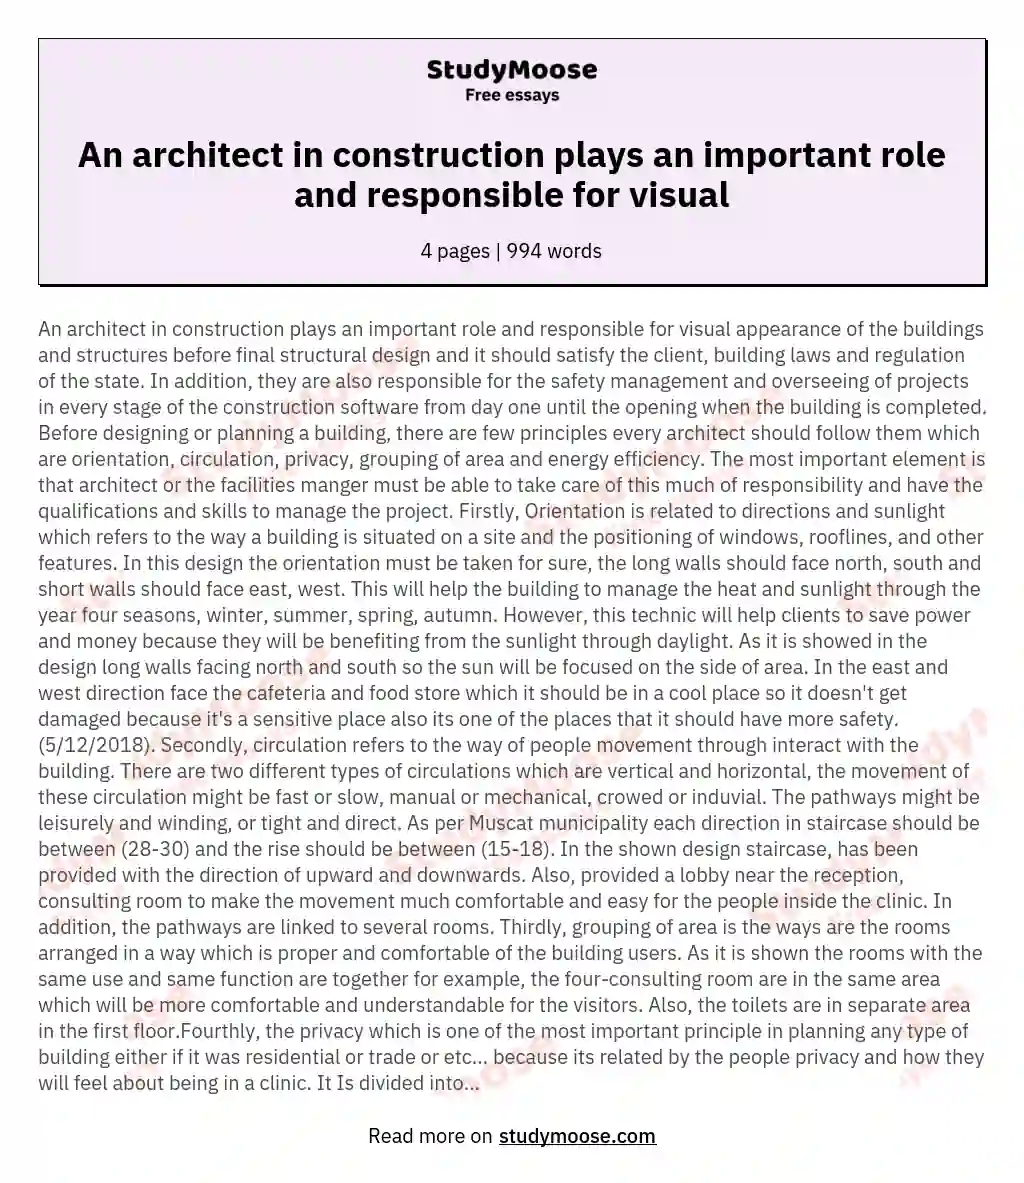 An architect in construction plays an important role and responsible for visual essay